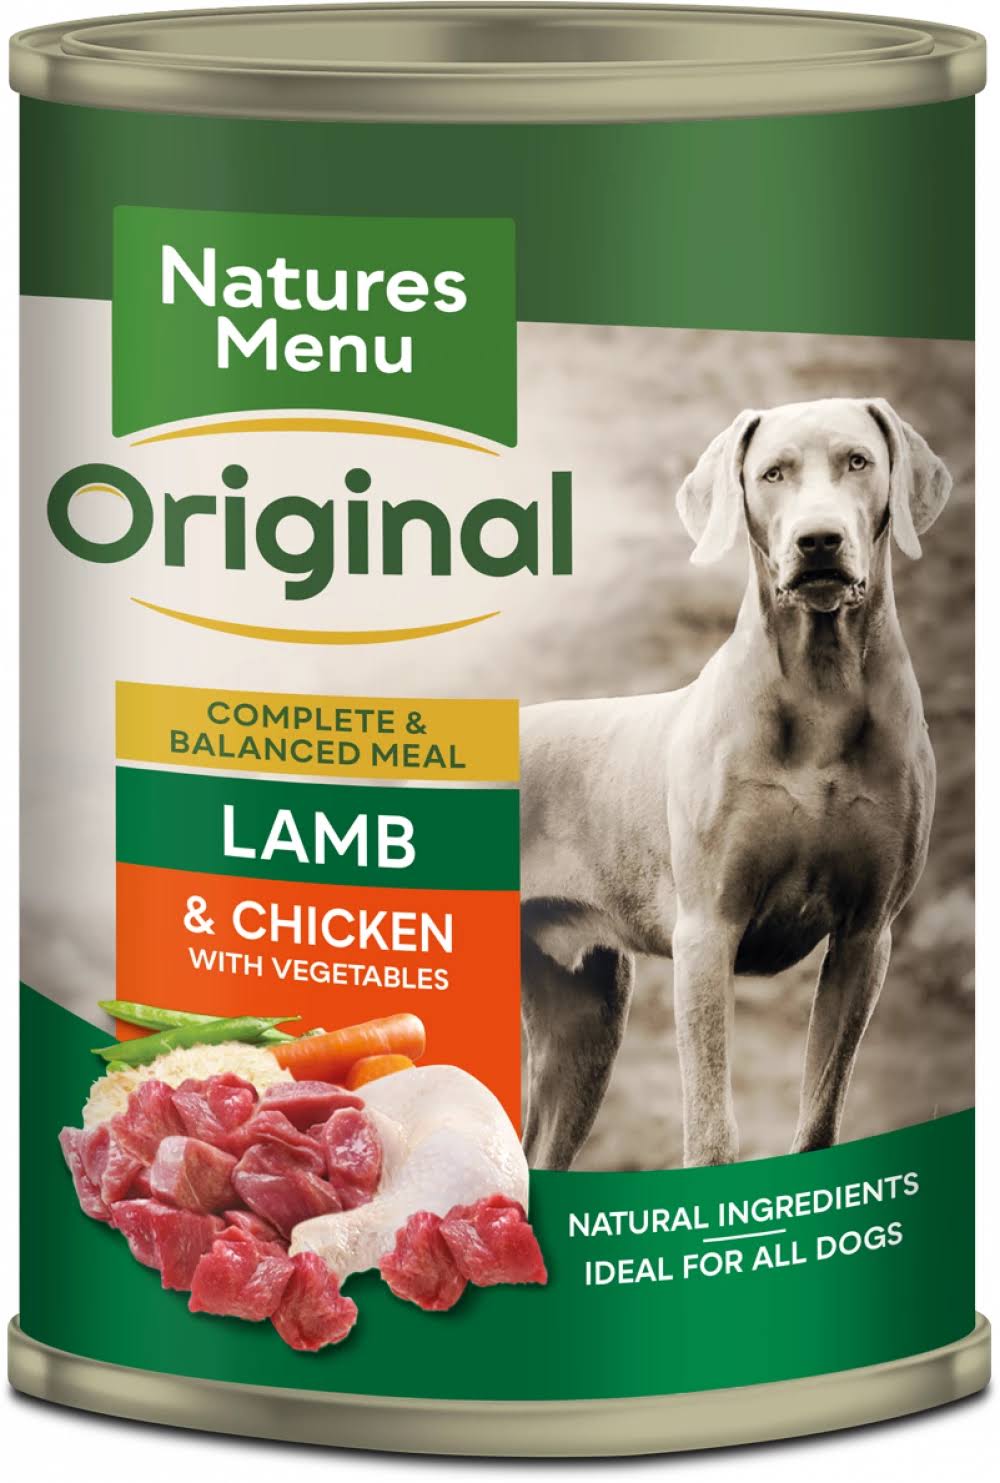 Natures Menu Lamb with Chicken Dog Food Cans - 12 x 400g